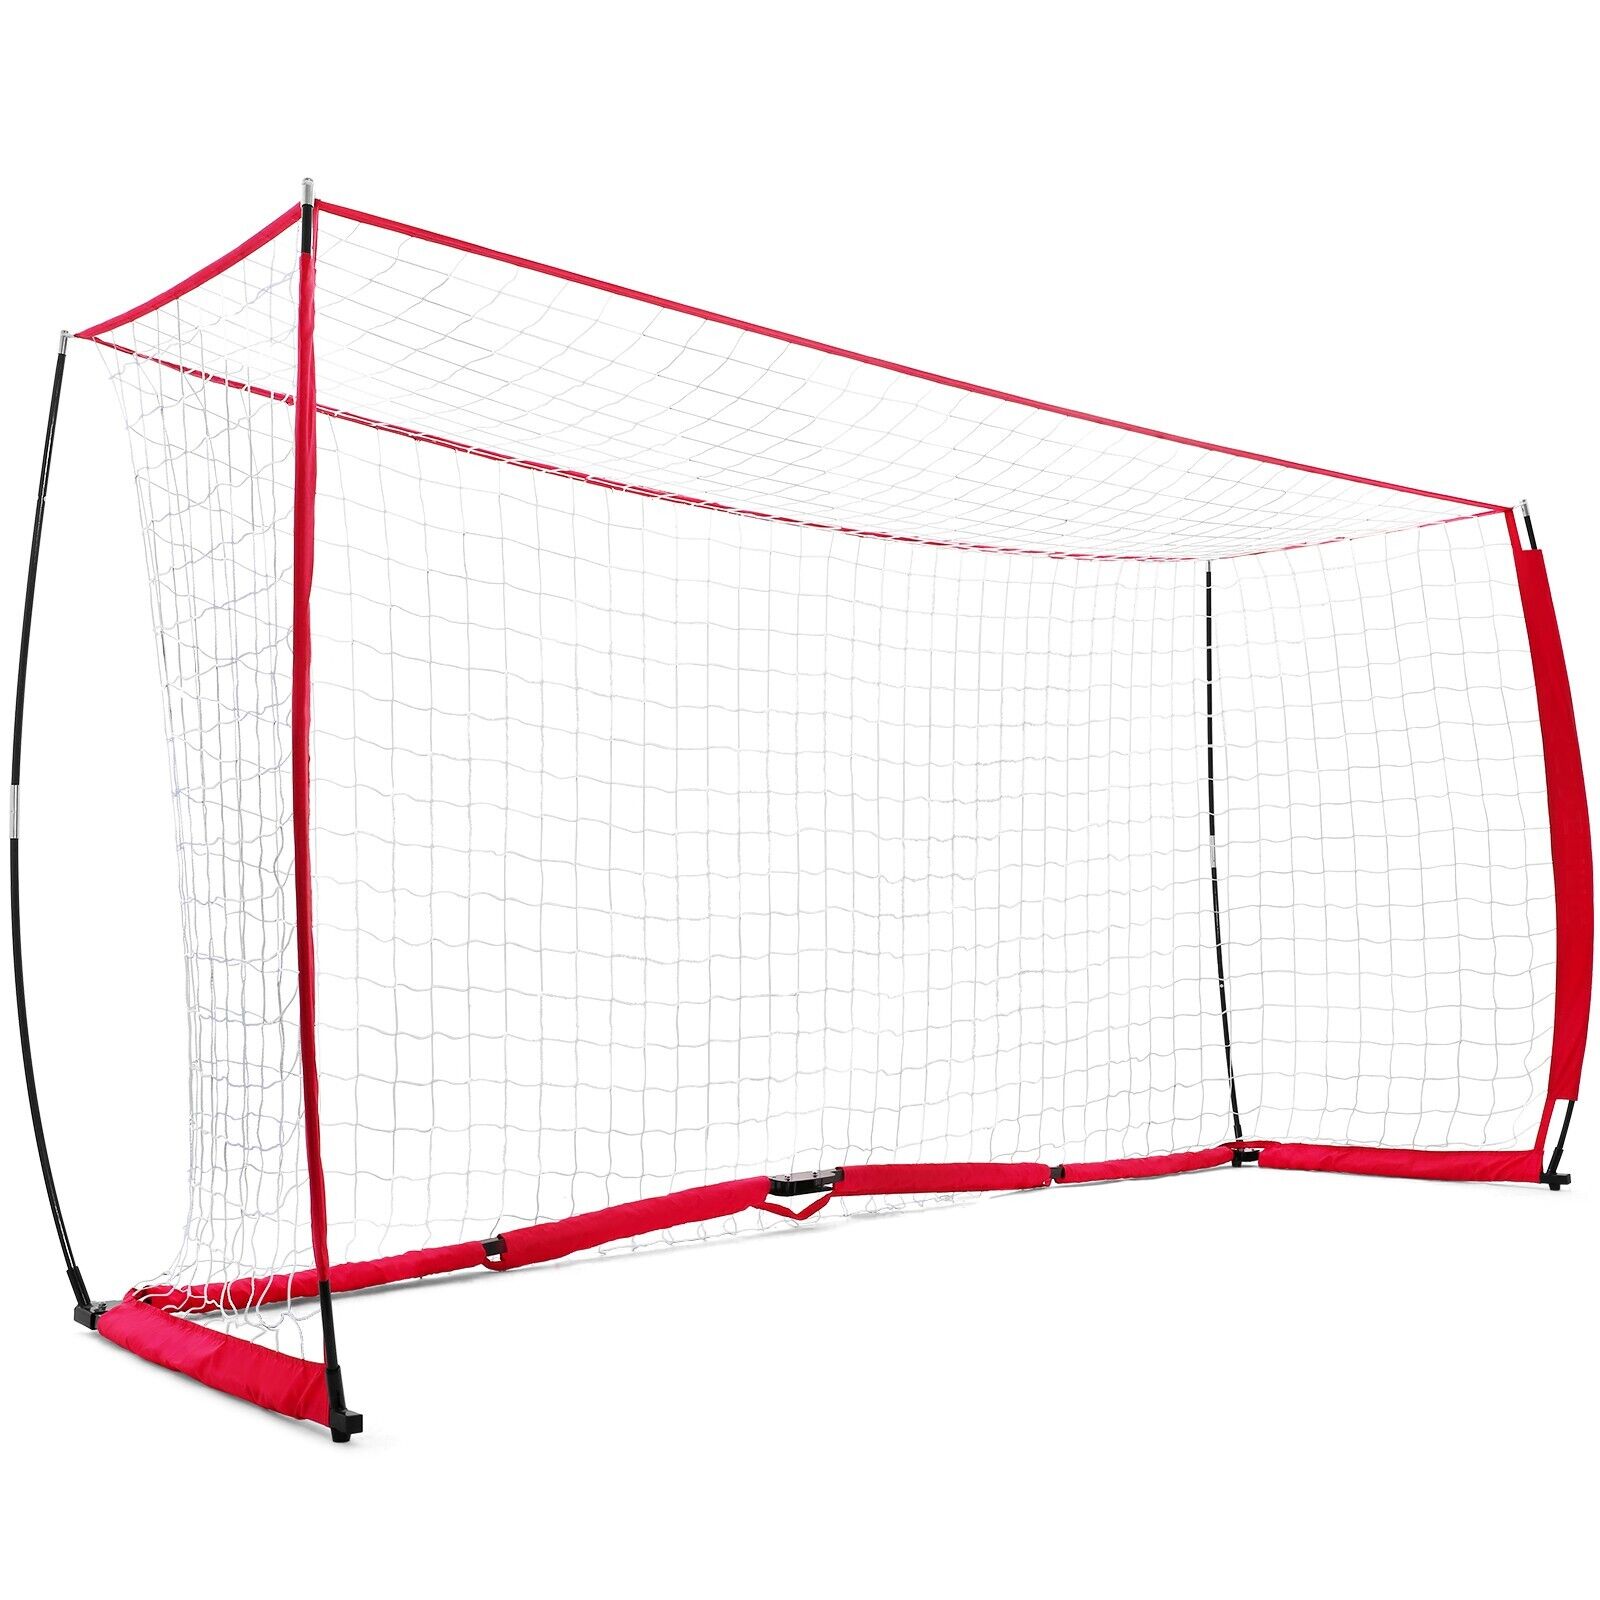 Soccer Goal Portable Bow Style Net Perfect For Soccer Practice Net 12ft x 6ft US